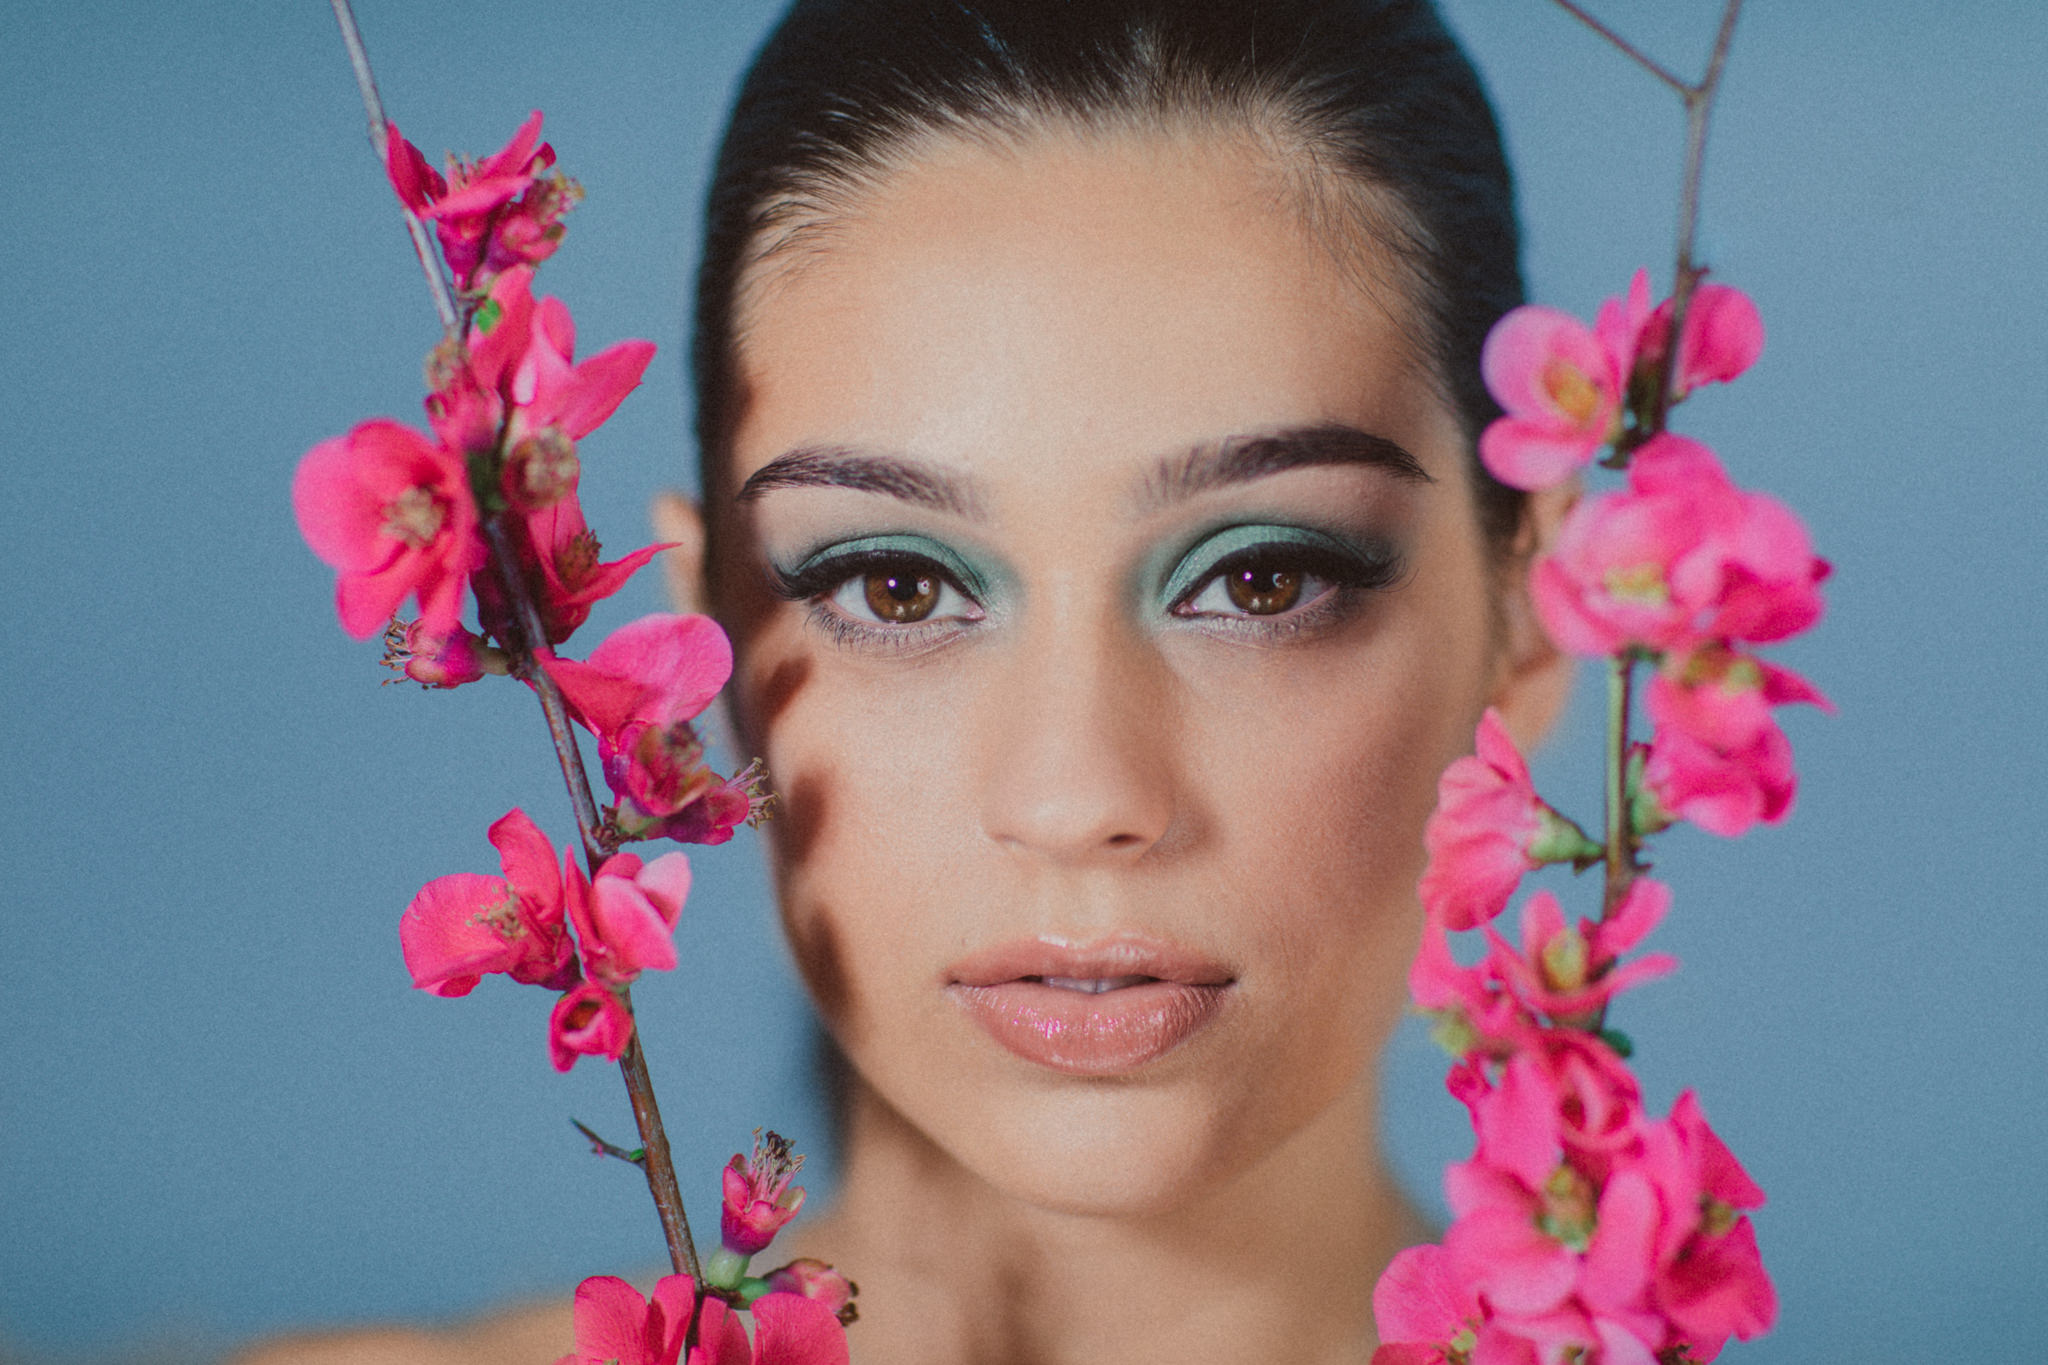 beauty and makeup products photography in melbourne